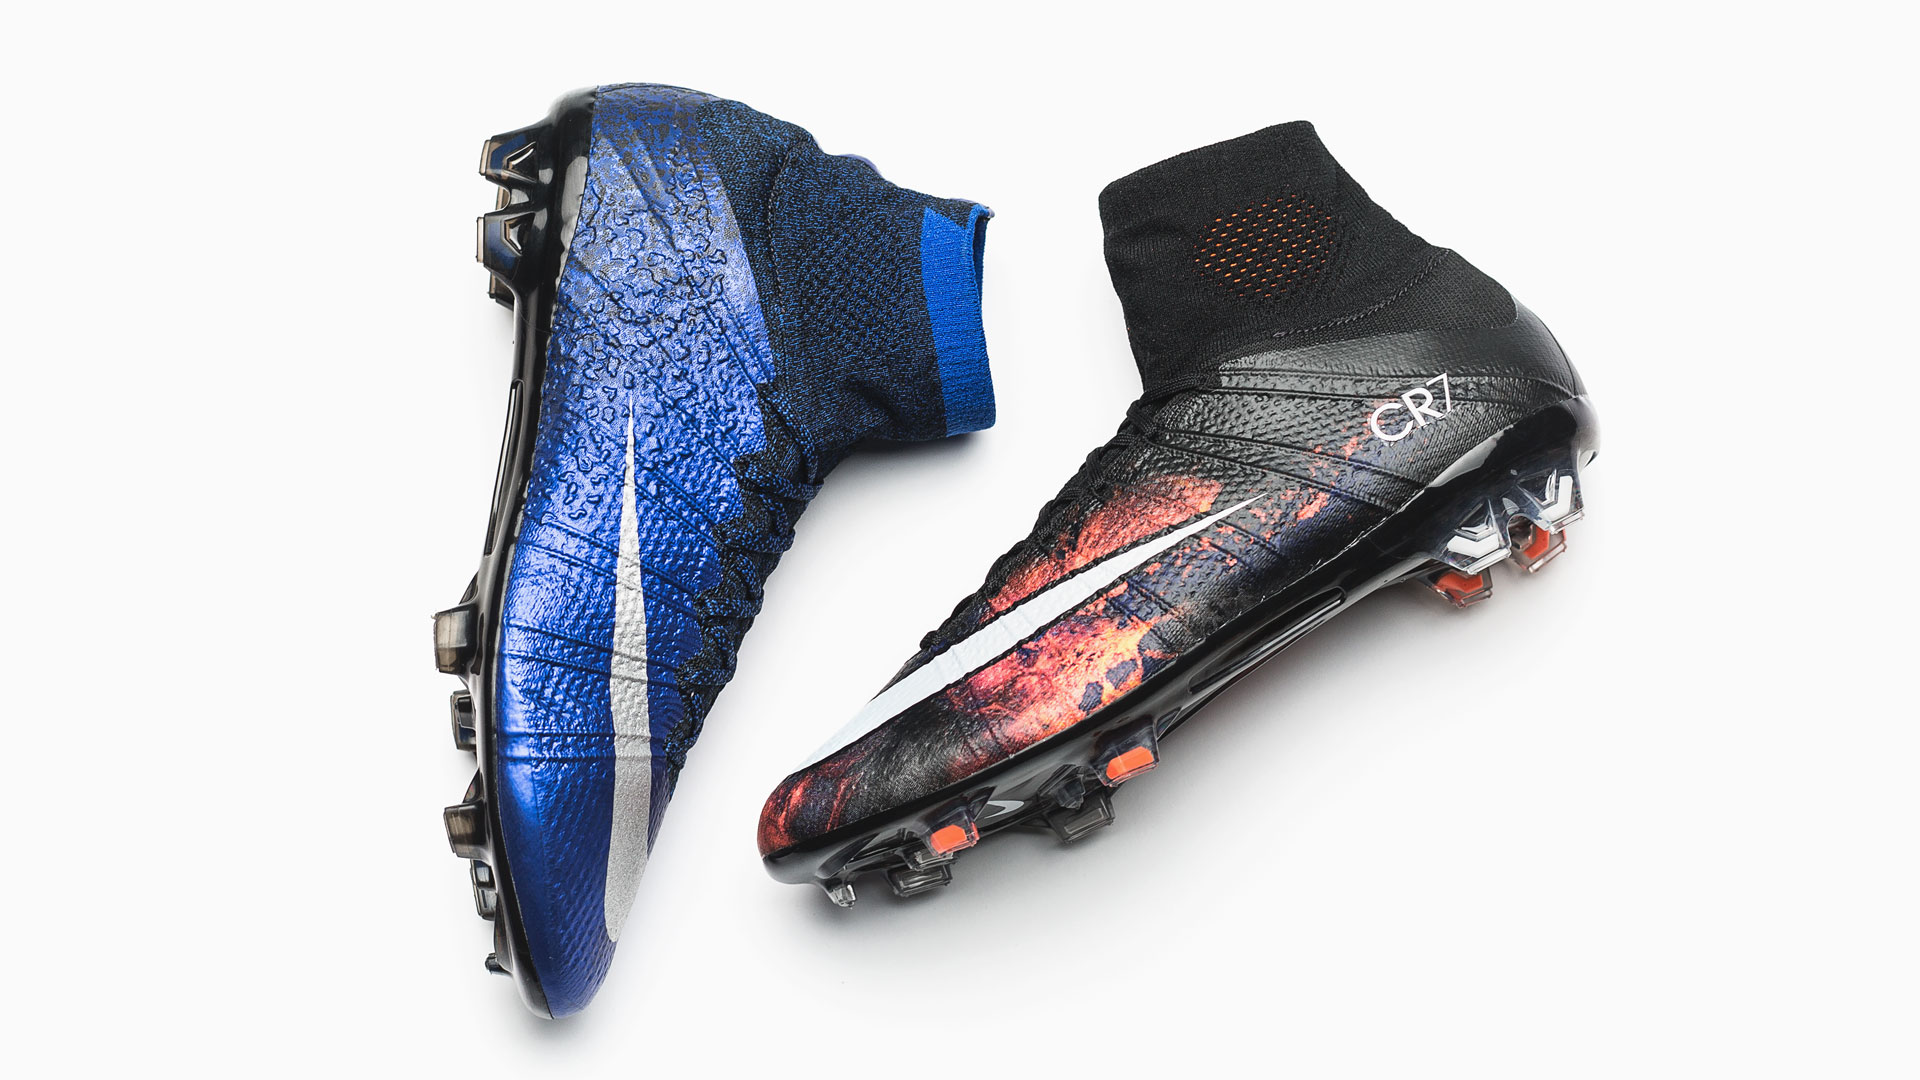 From to diamonds: Mercurial Superfly CR7